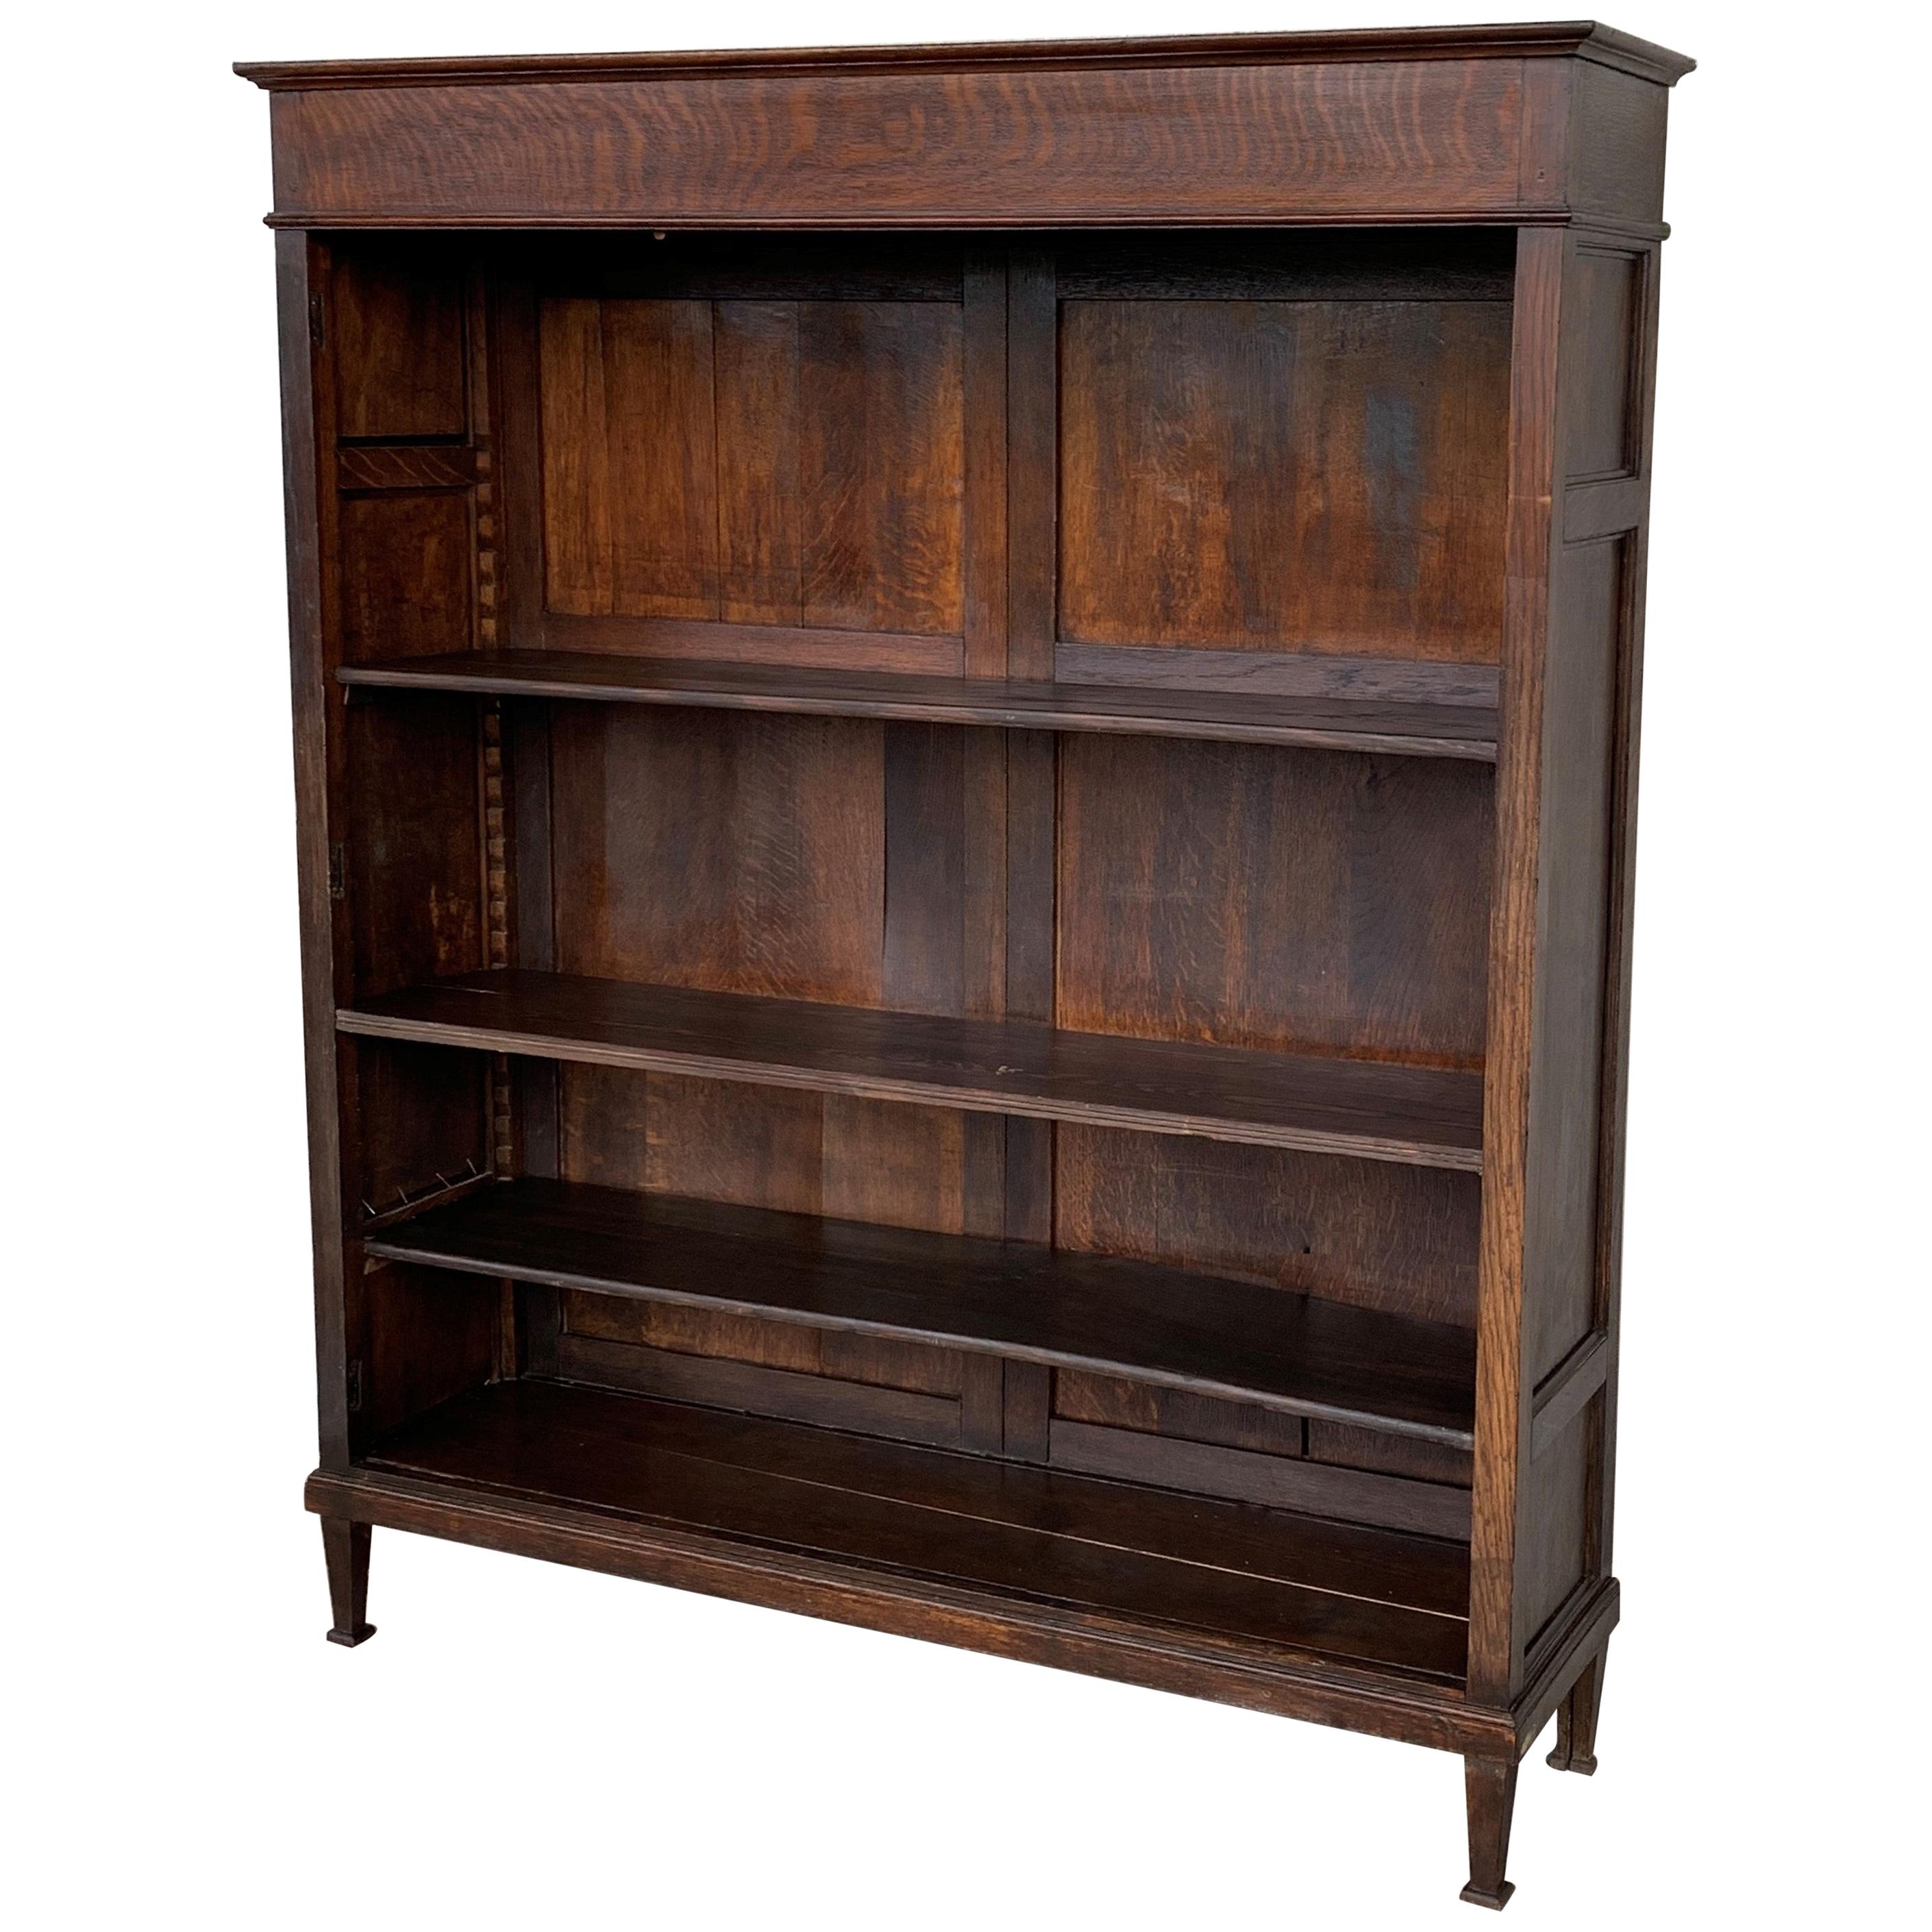 19th Century Antique Victorian Mahogany Open Bookcase with Three Shelves